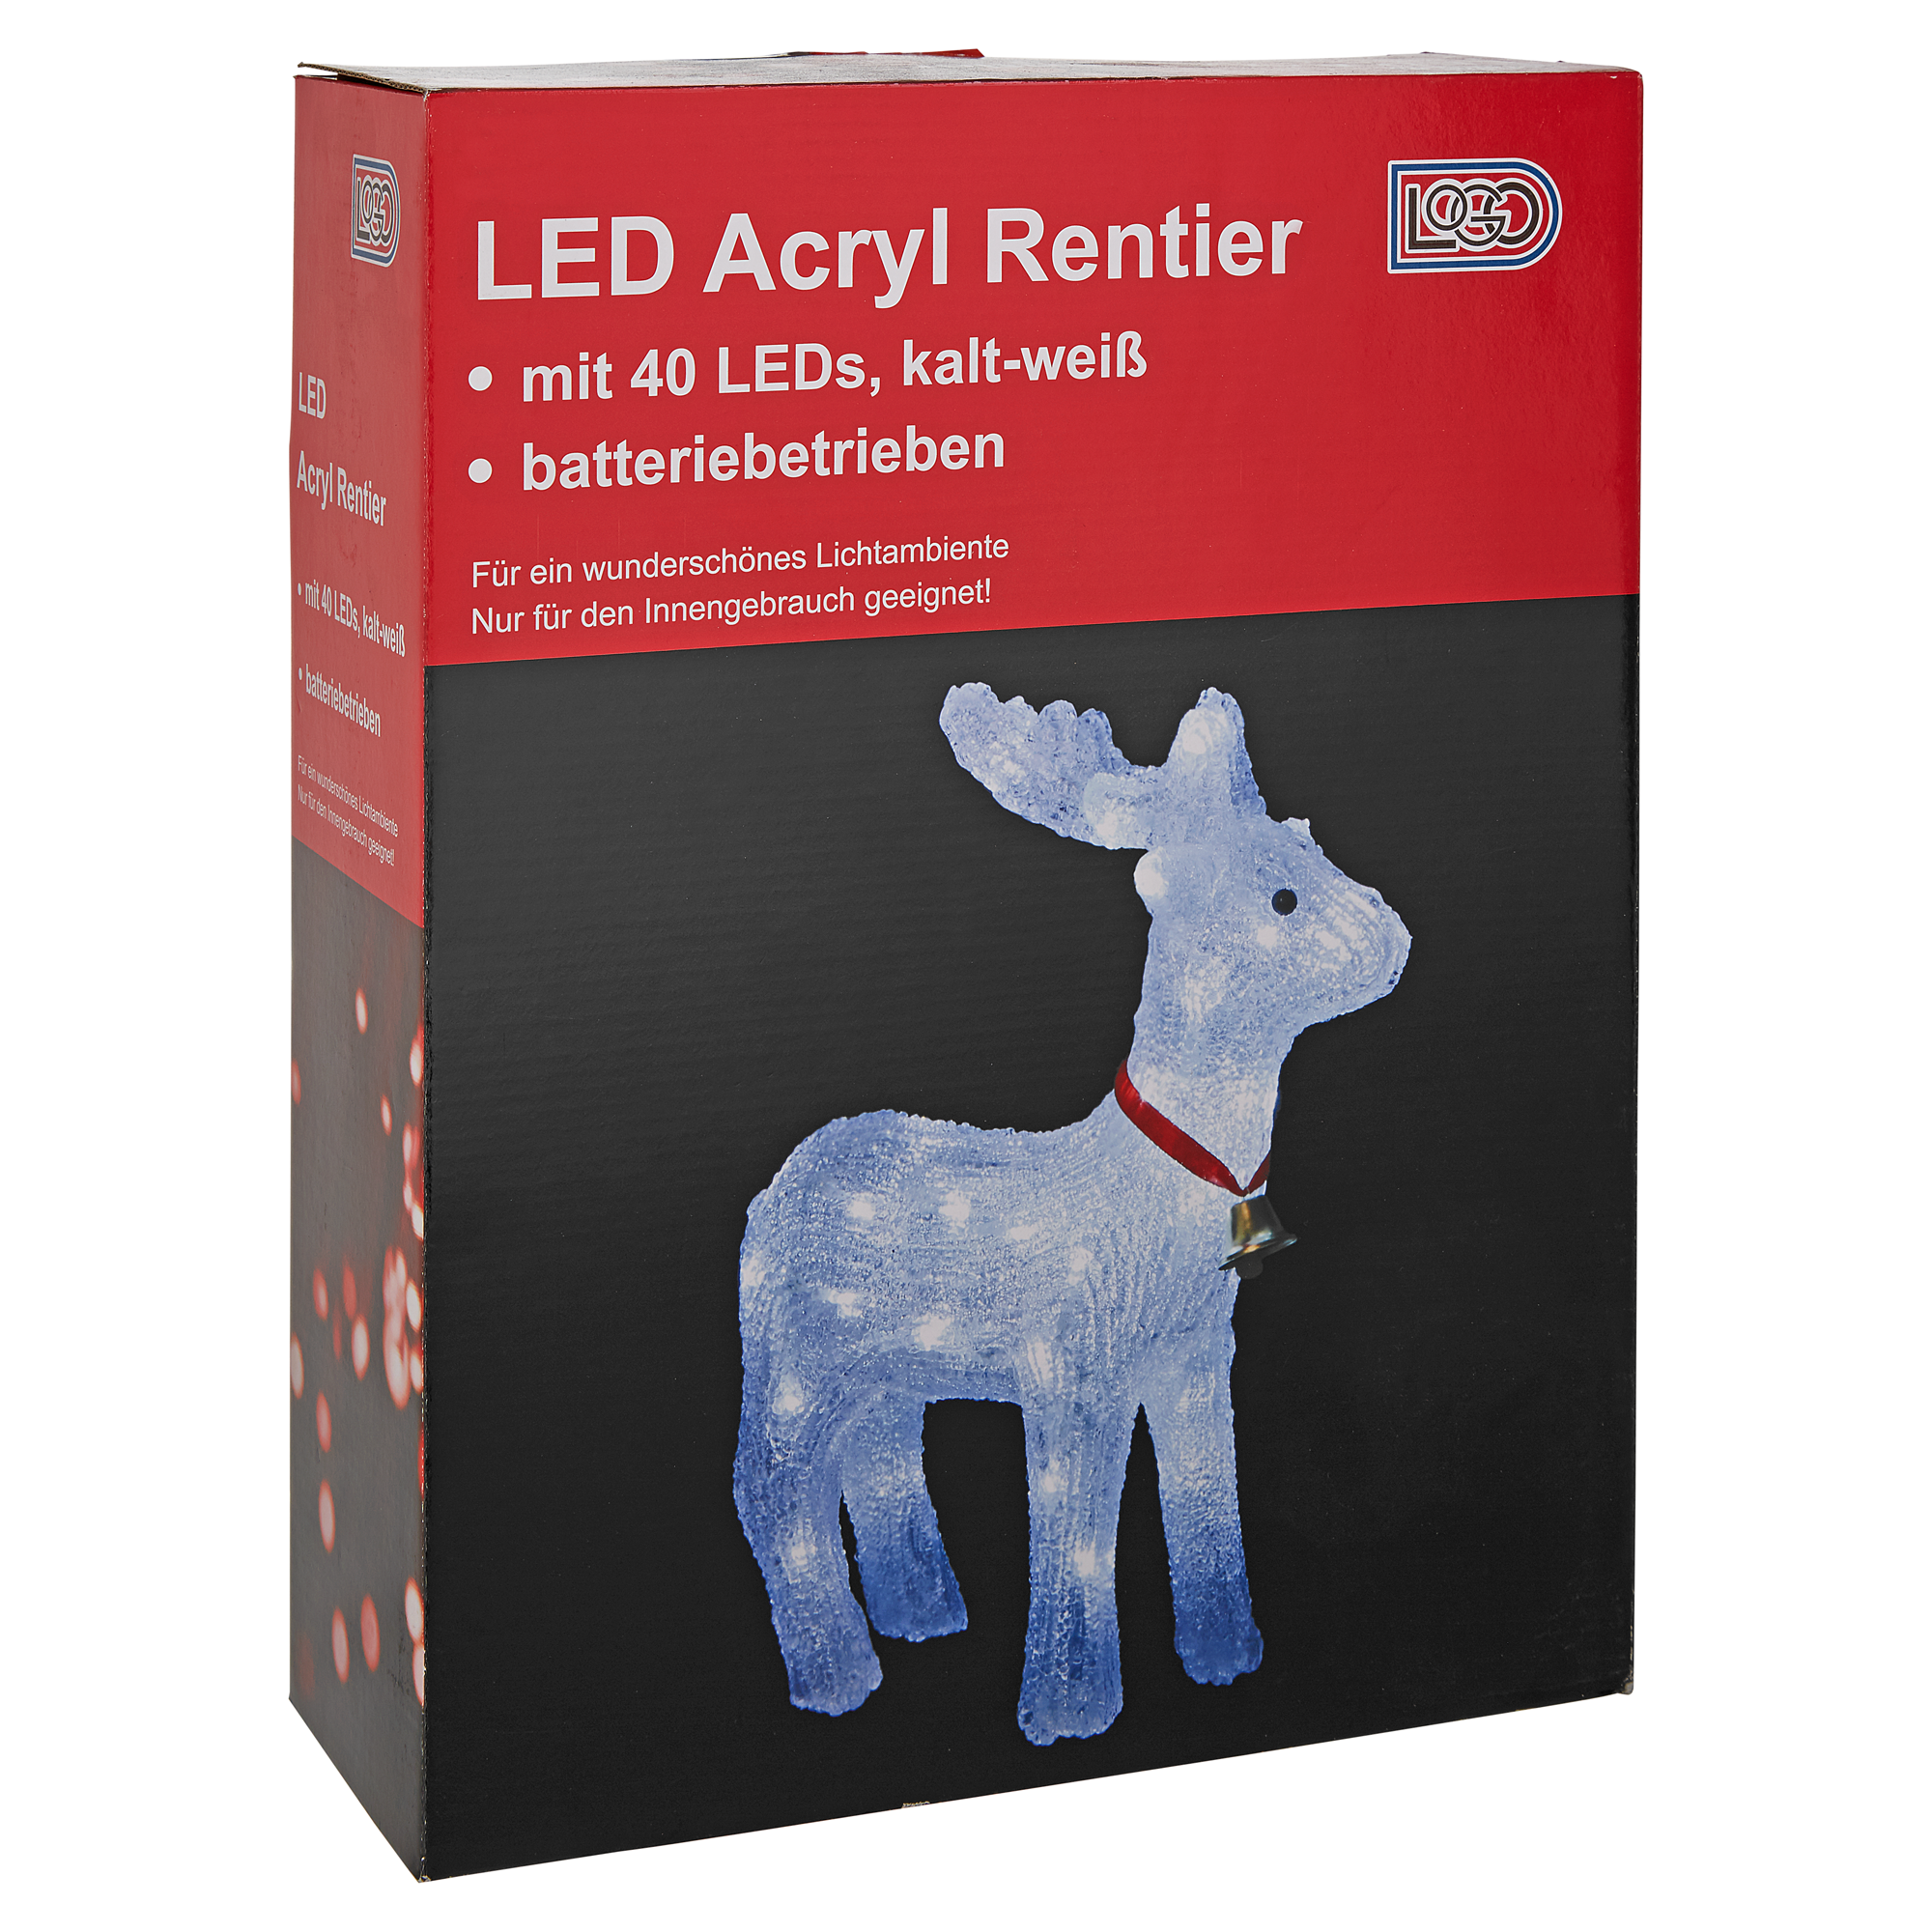 Weihnachtsbeleuchtung LED-Rentier Acryl 35 cm + product picture